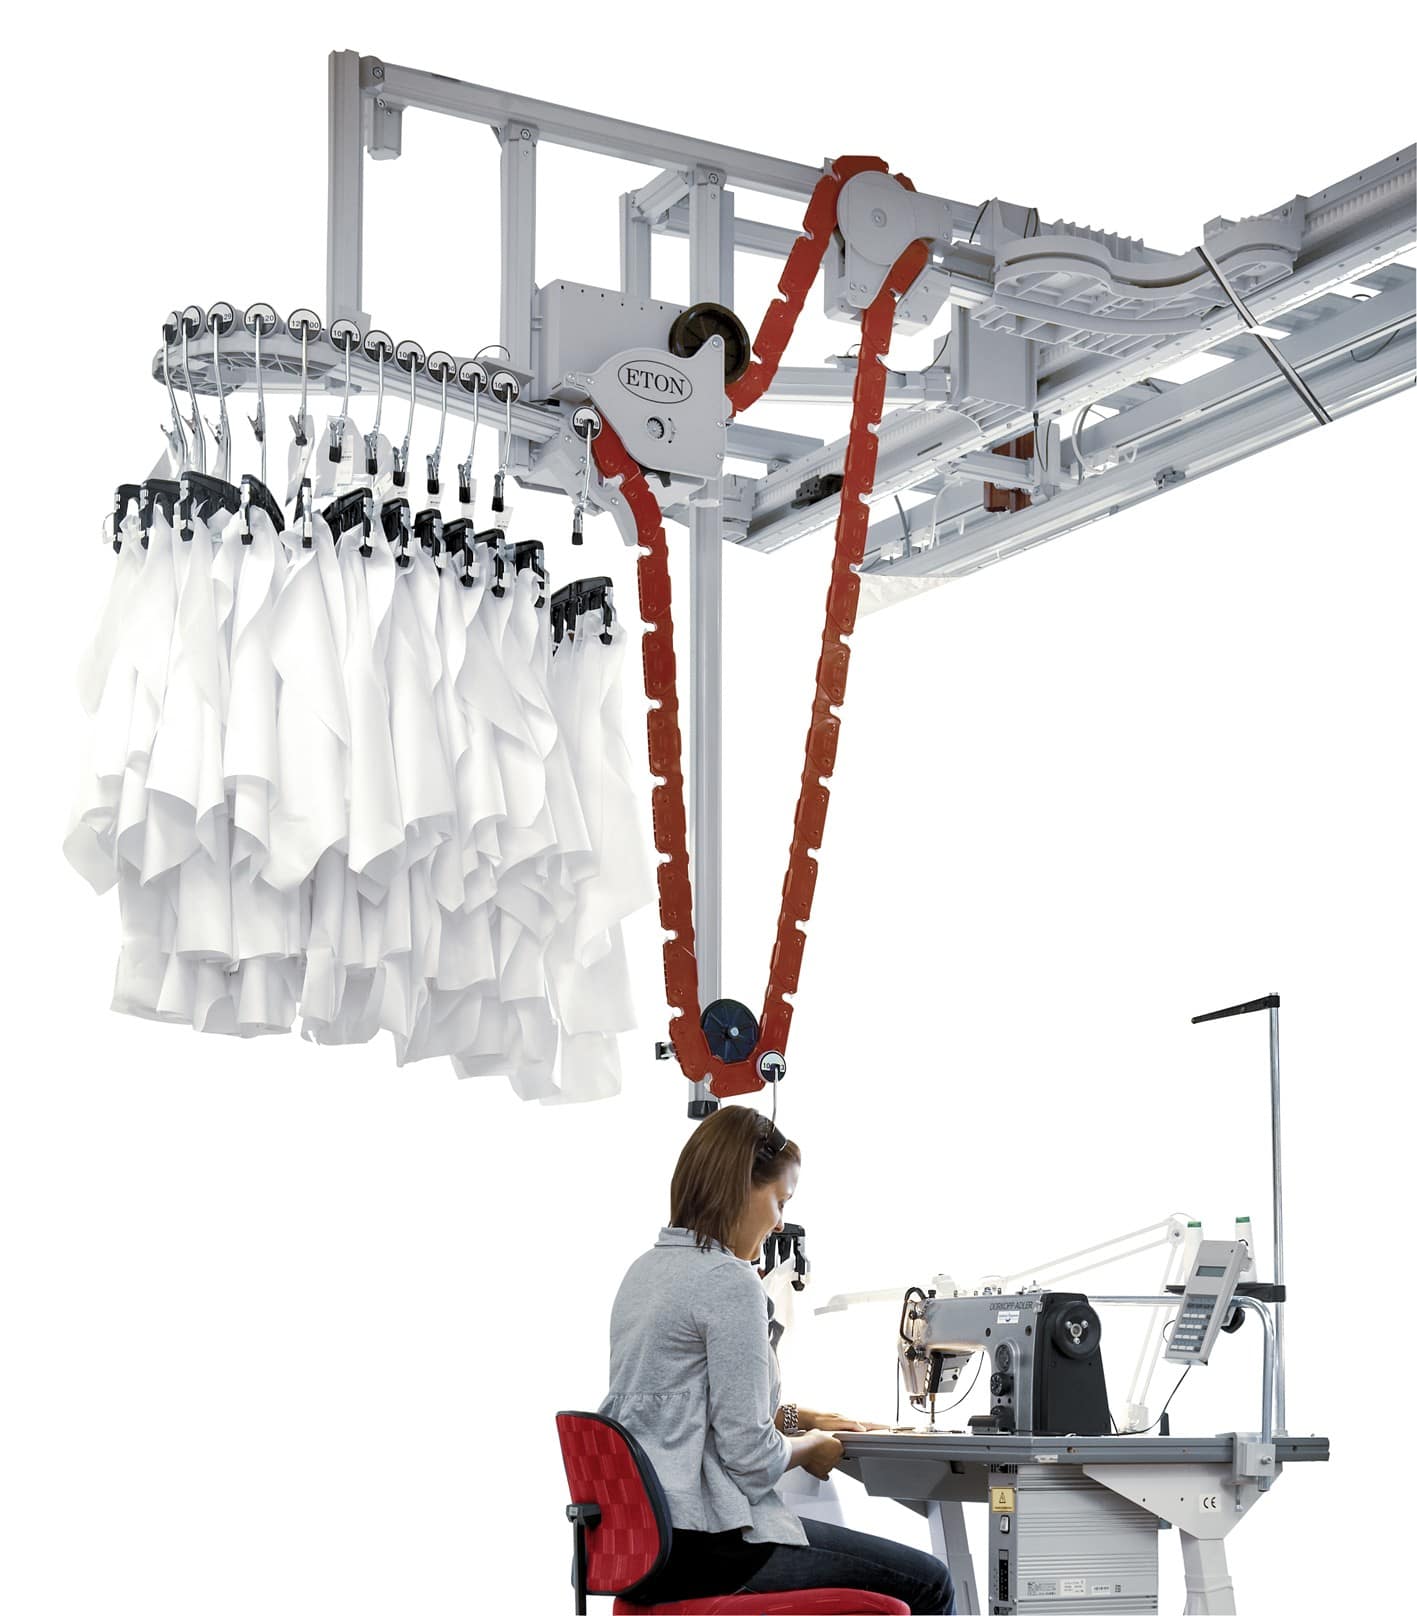 The Eton System is one of the most versatile conveyor systems available